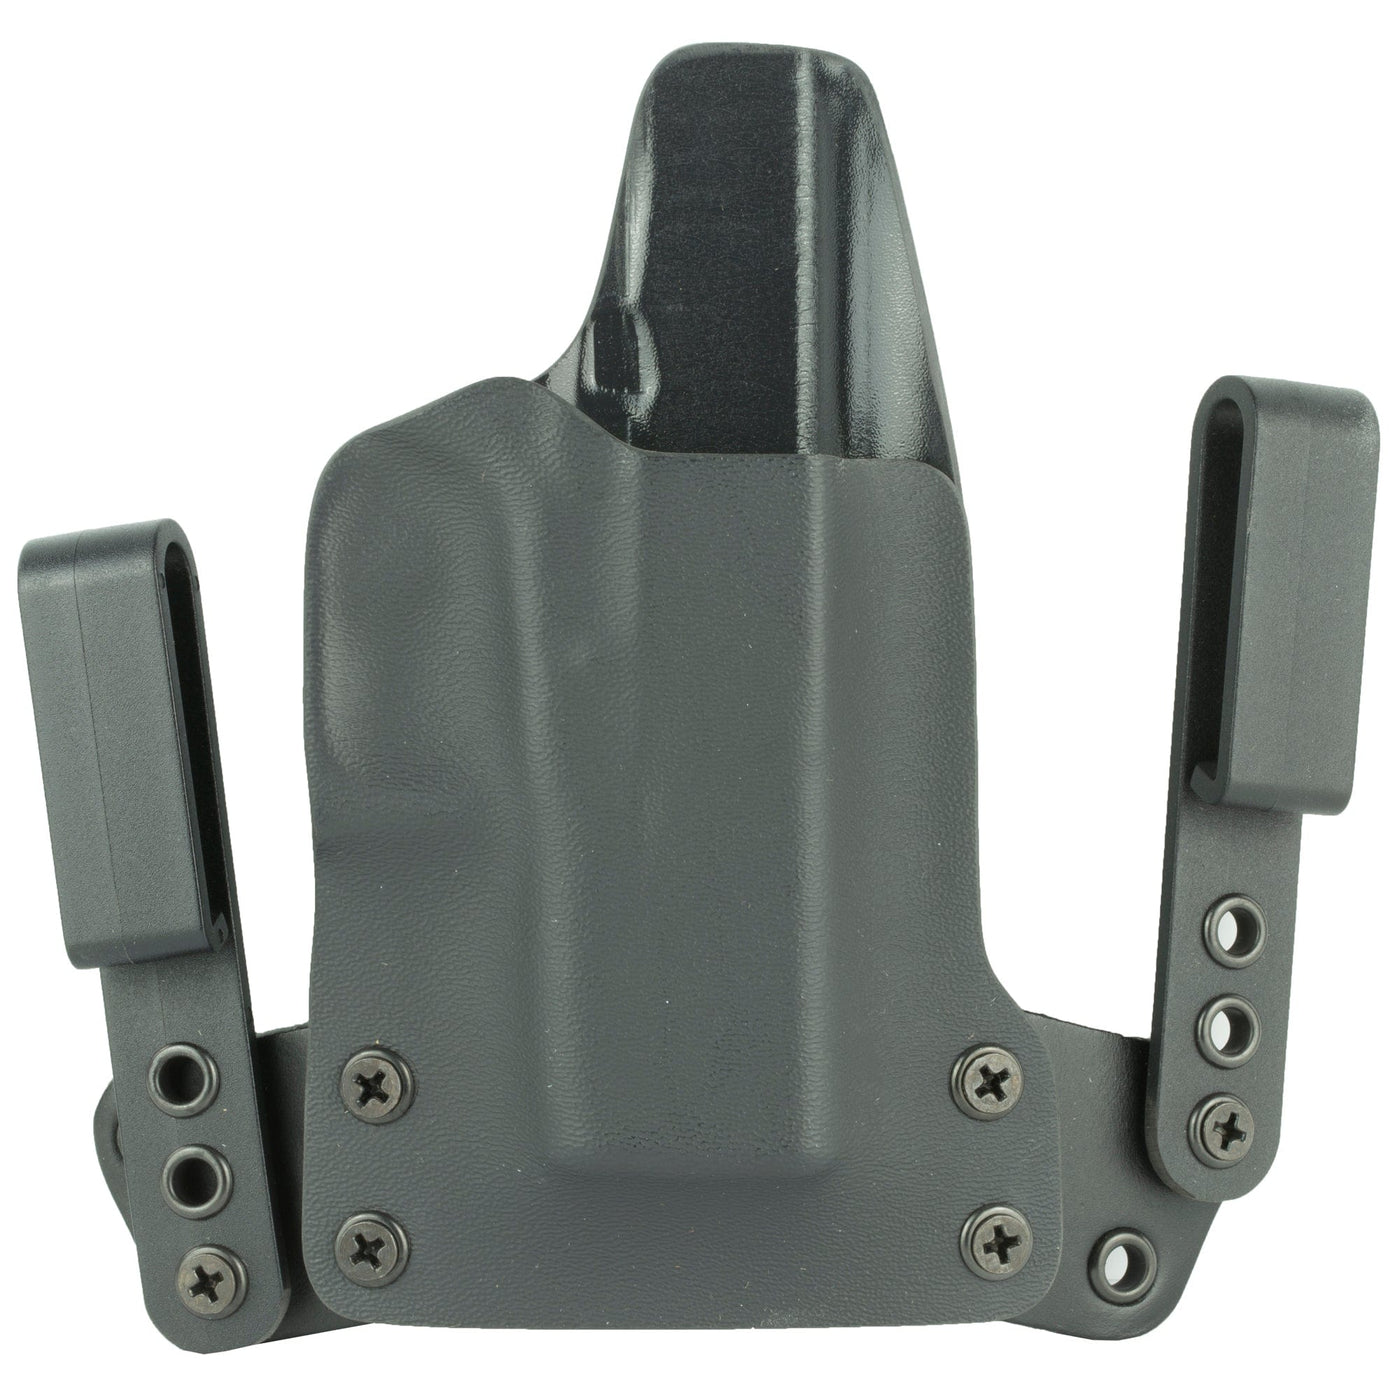 BlackPoint Tactical Blk Pnt Mini Wing For Glk 43 Rh Blk Holsters